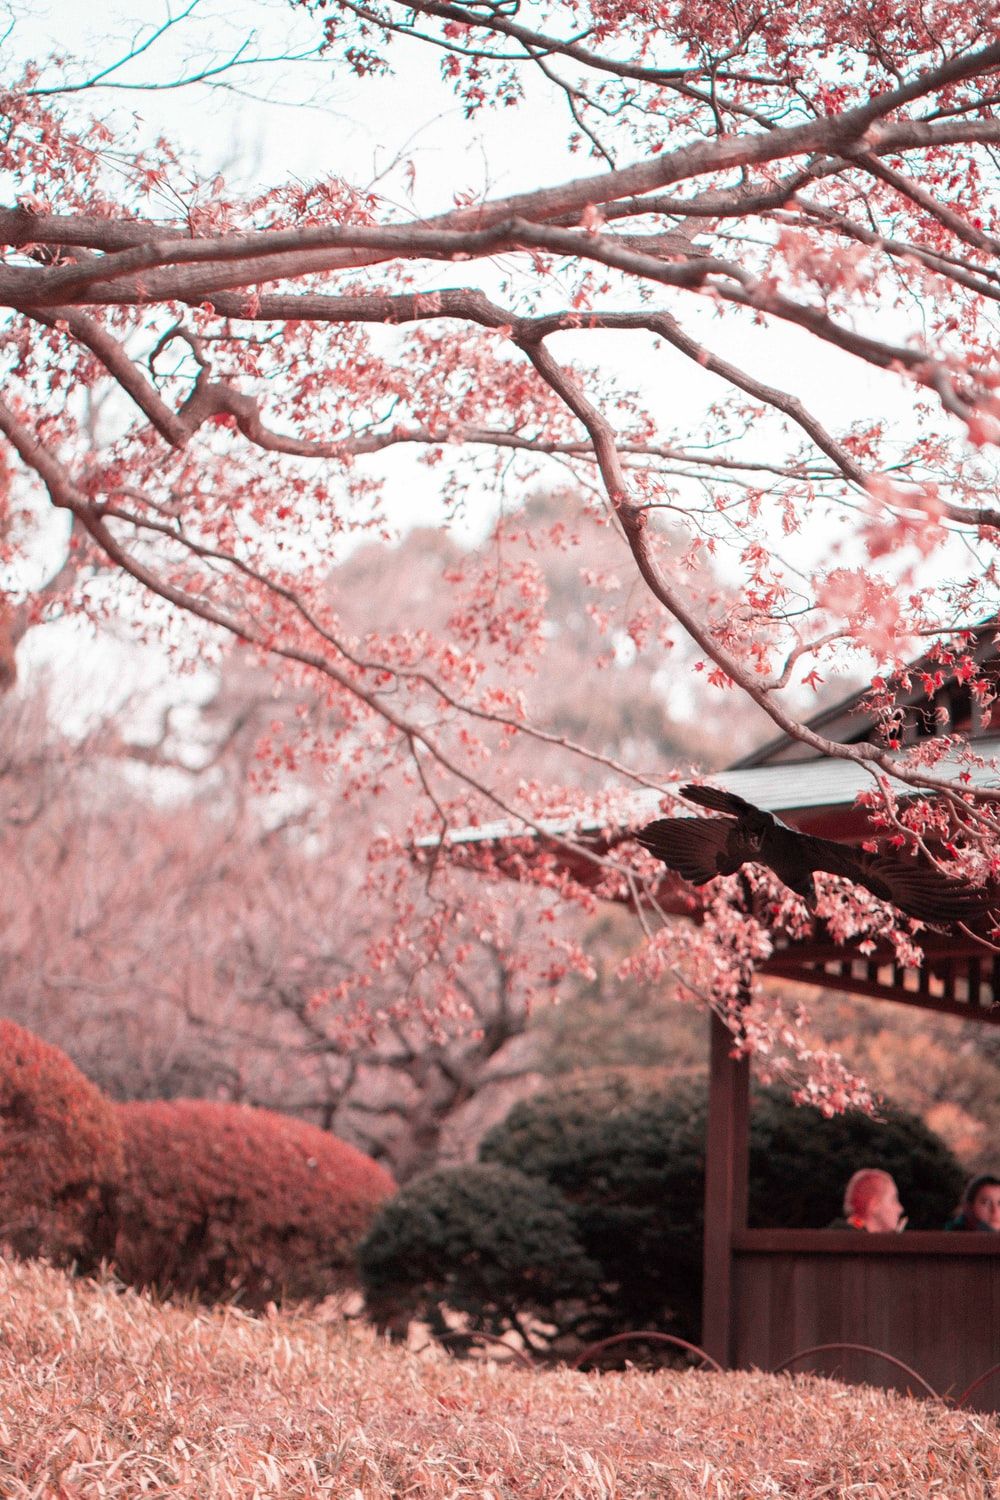 A tree with pink flowers in the background - Cherry blossom